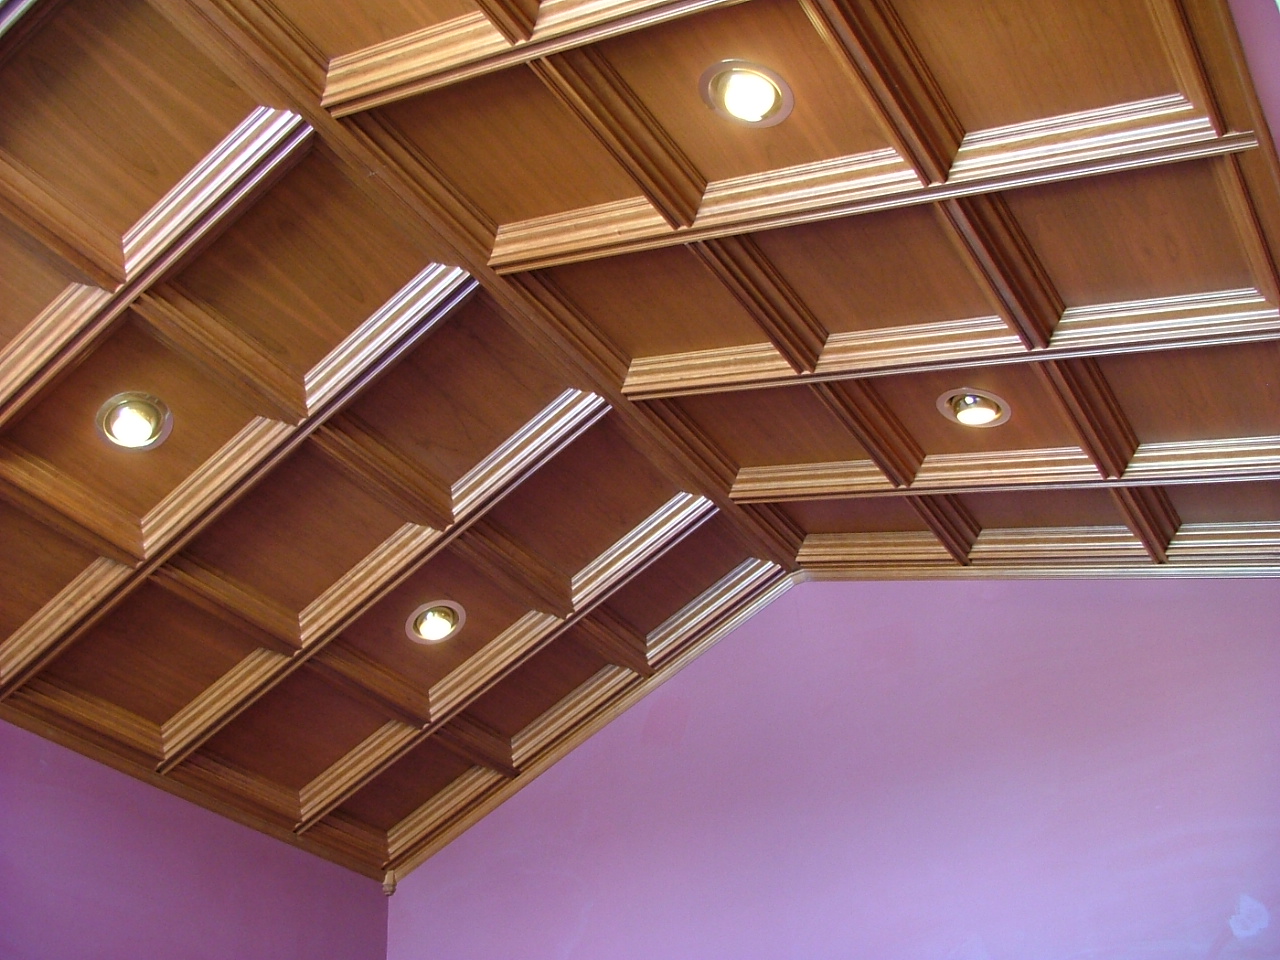 Woodgrid Coffered Ceilings By Midwestern Wood Products Co Wood